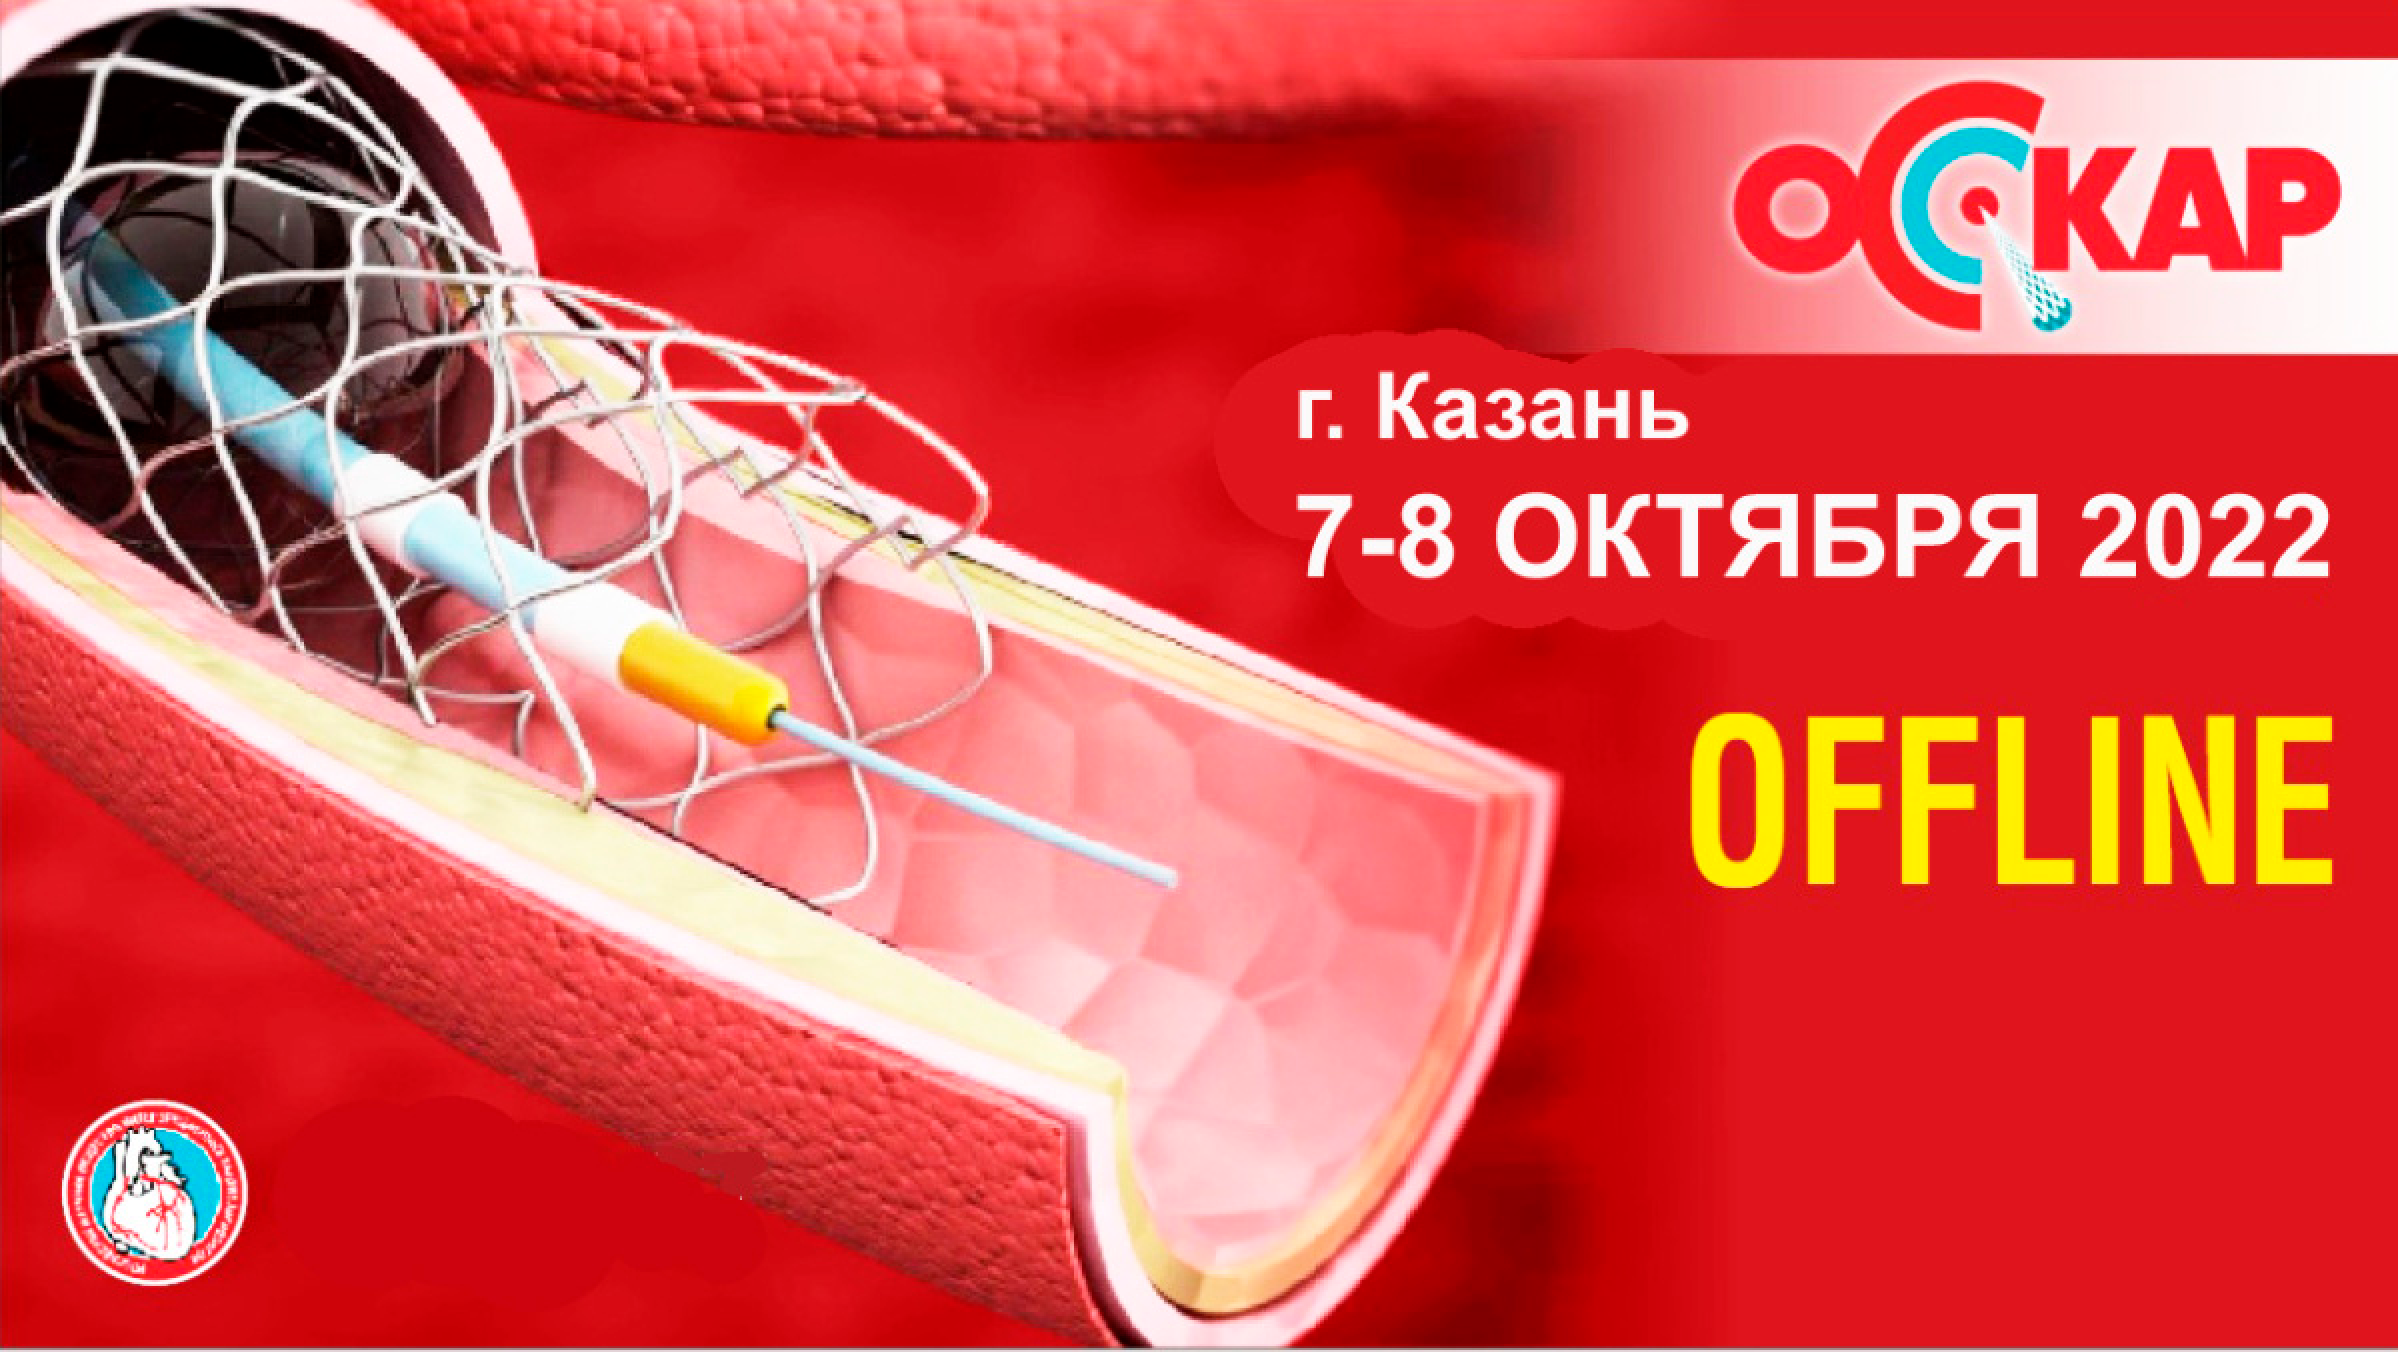 Workshop “Optimize your coronary interventions” (2022.10.7-8)